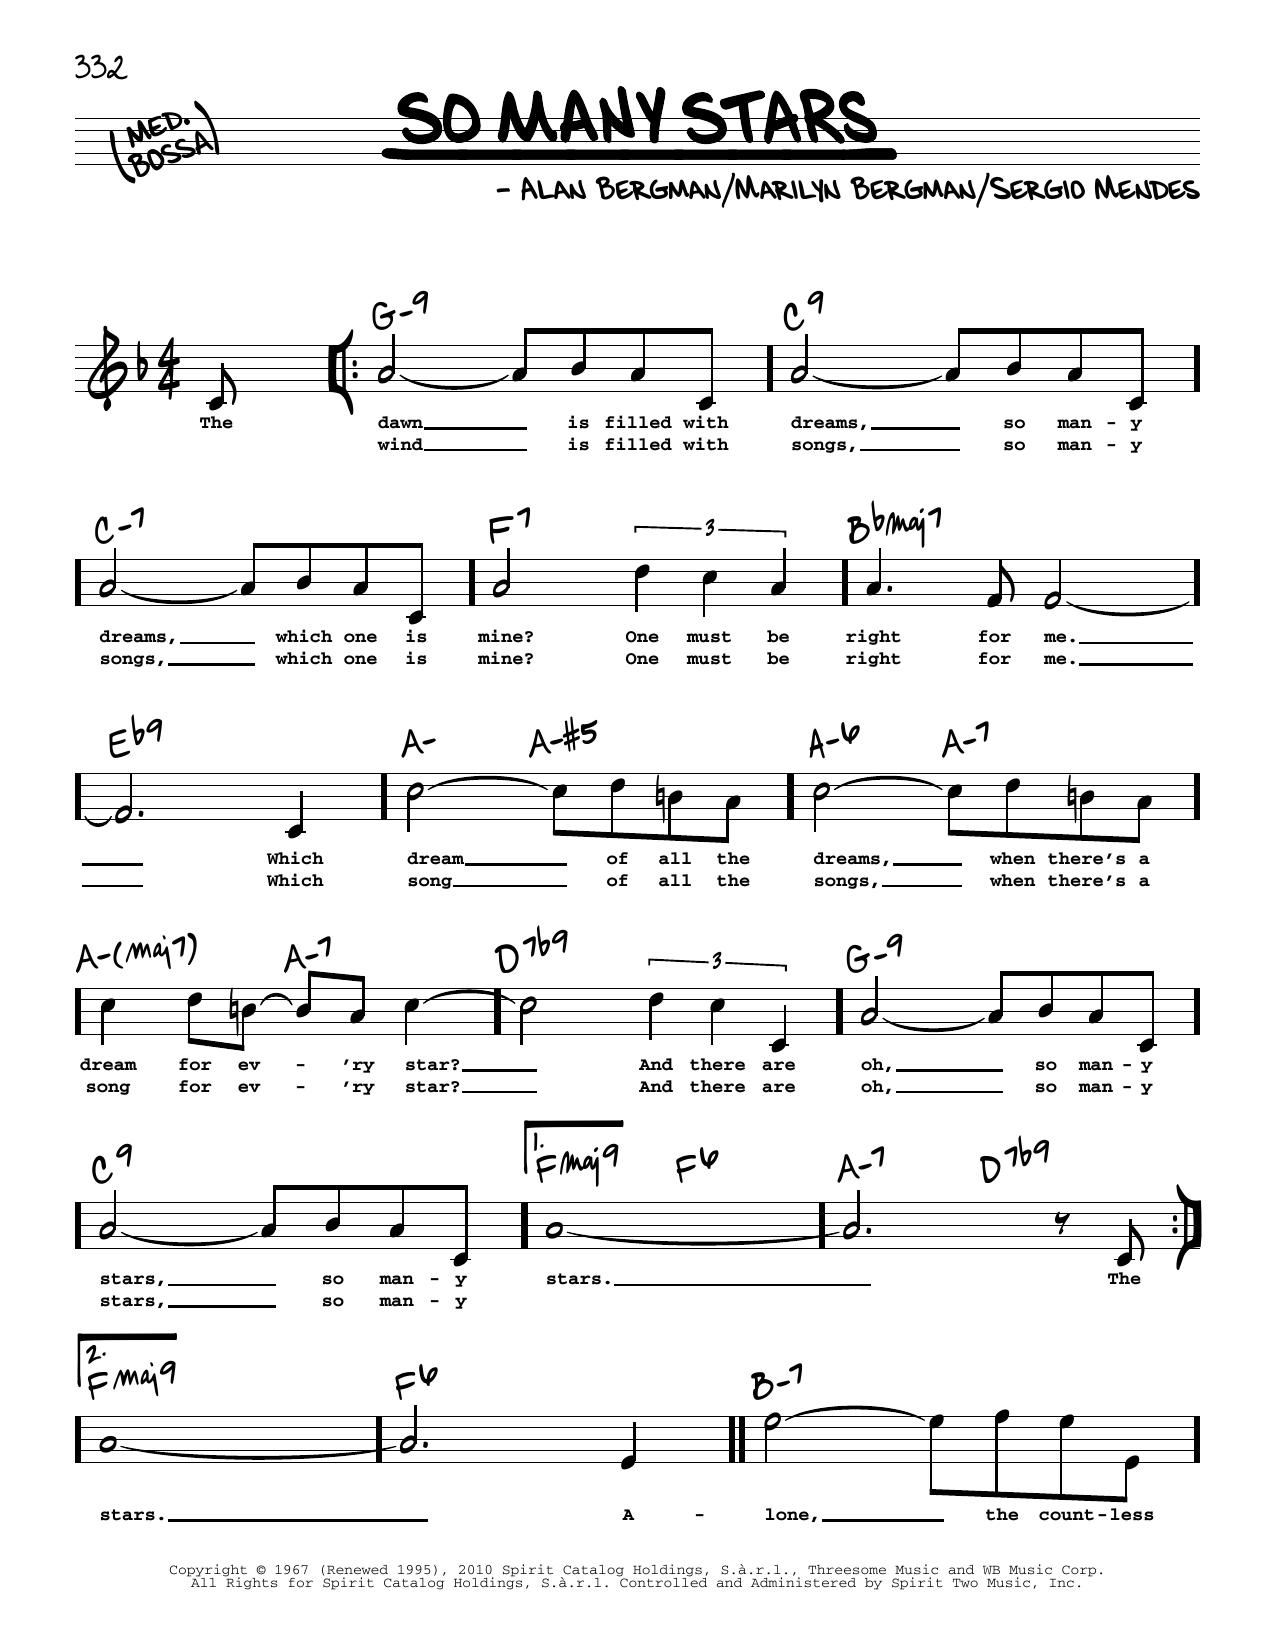 Download Sergio Mendes So Many Stars (High Voice) Sheet Music